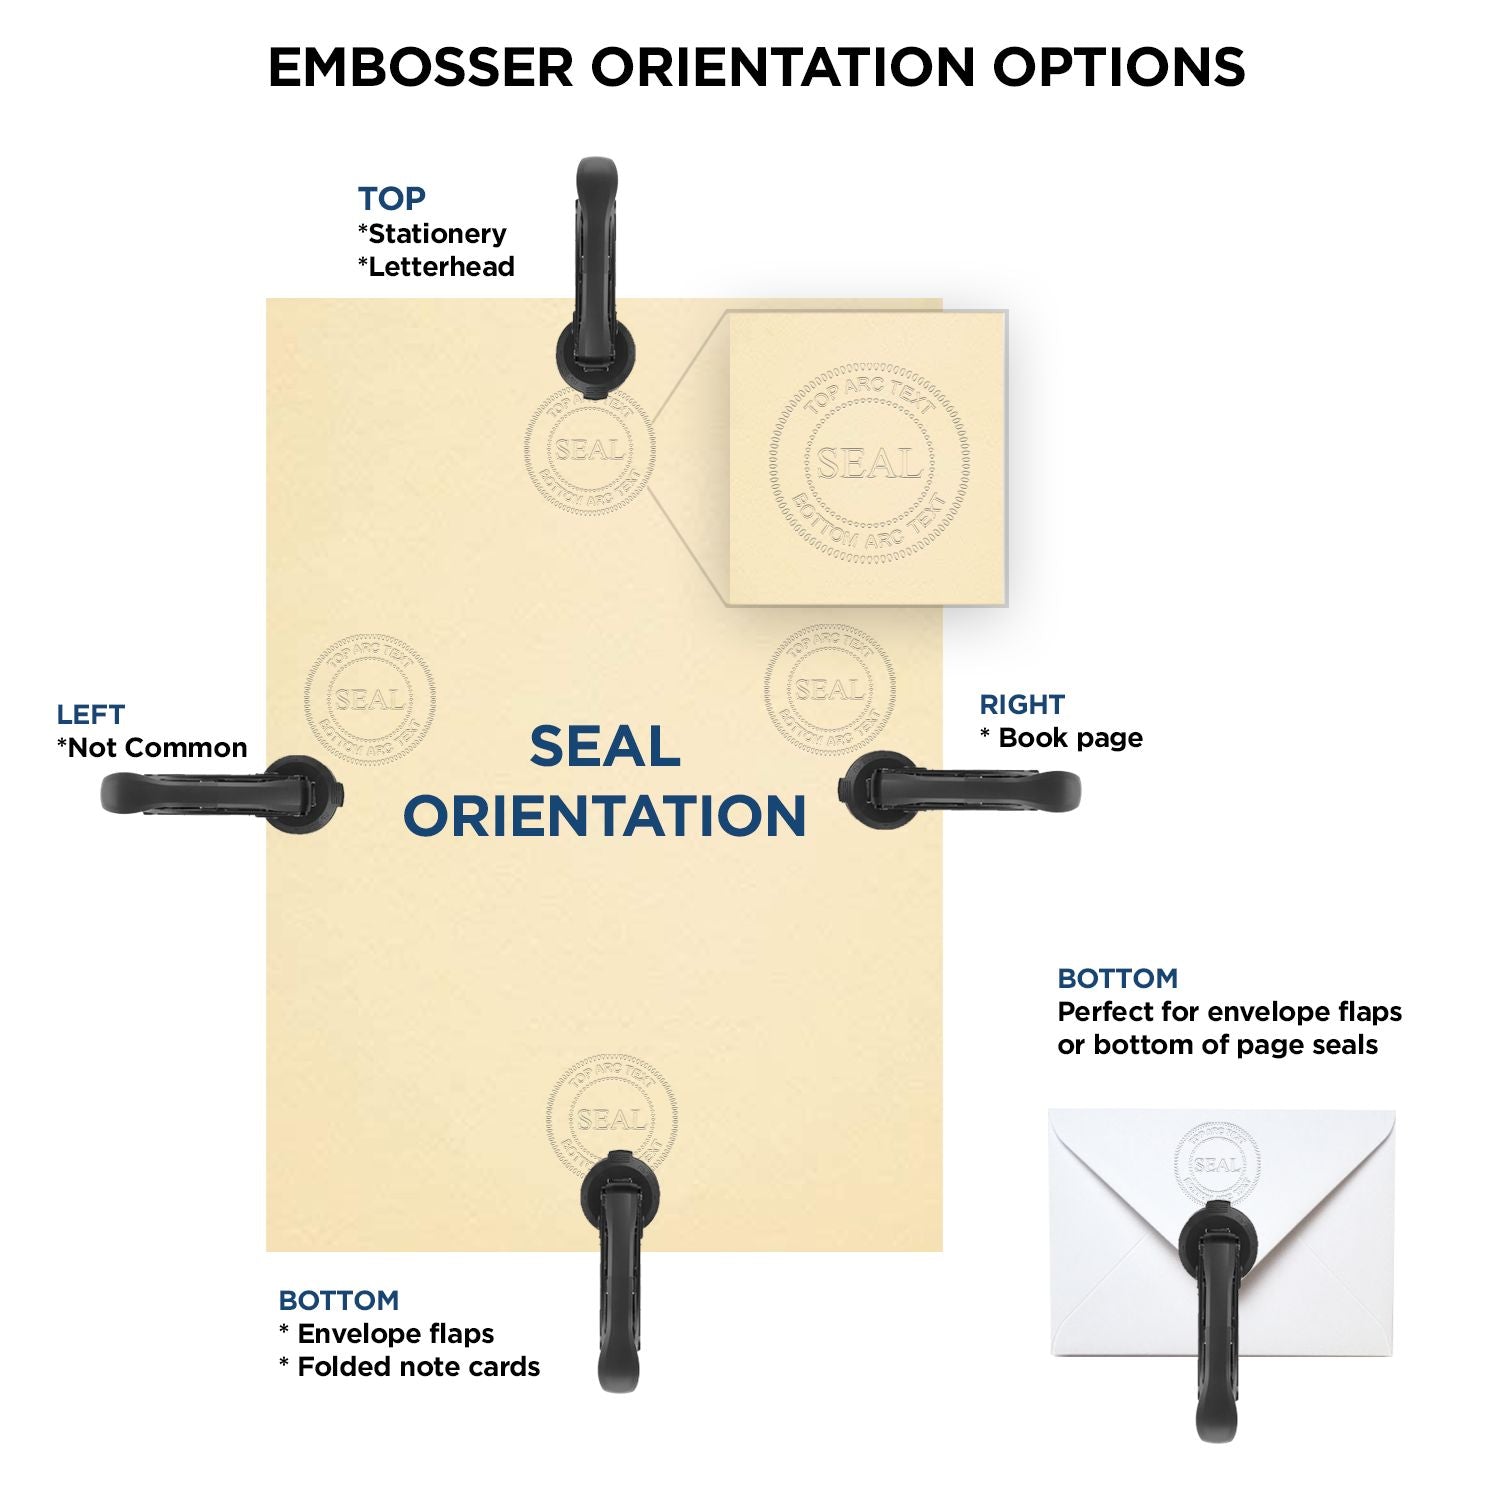 An infographic for the Heavy Duty Kentucky Landscape Architect Cast Iron Embosser showing embosser orientation, this is showing examples of a top, bottom, right and left insert.